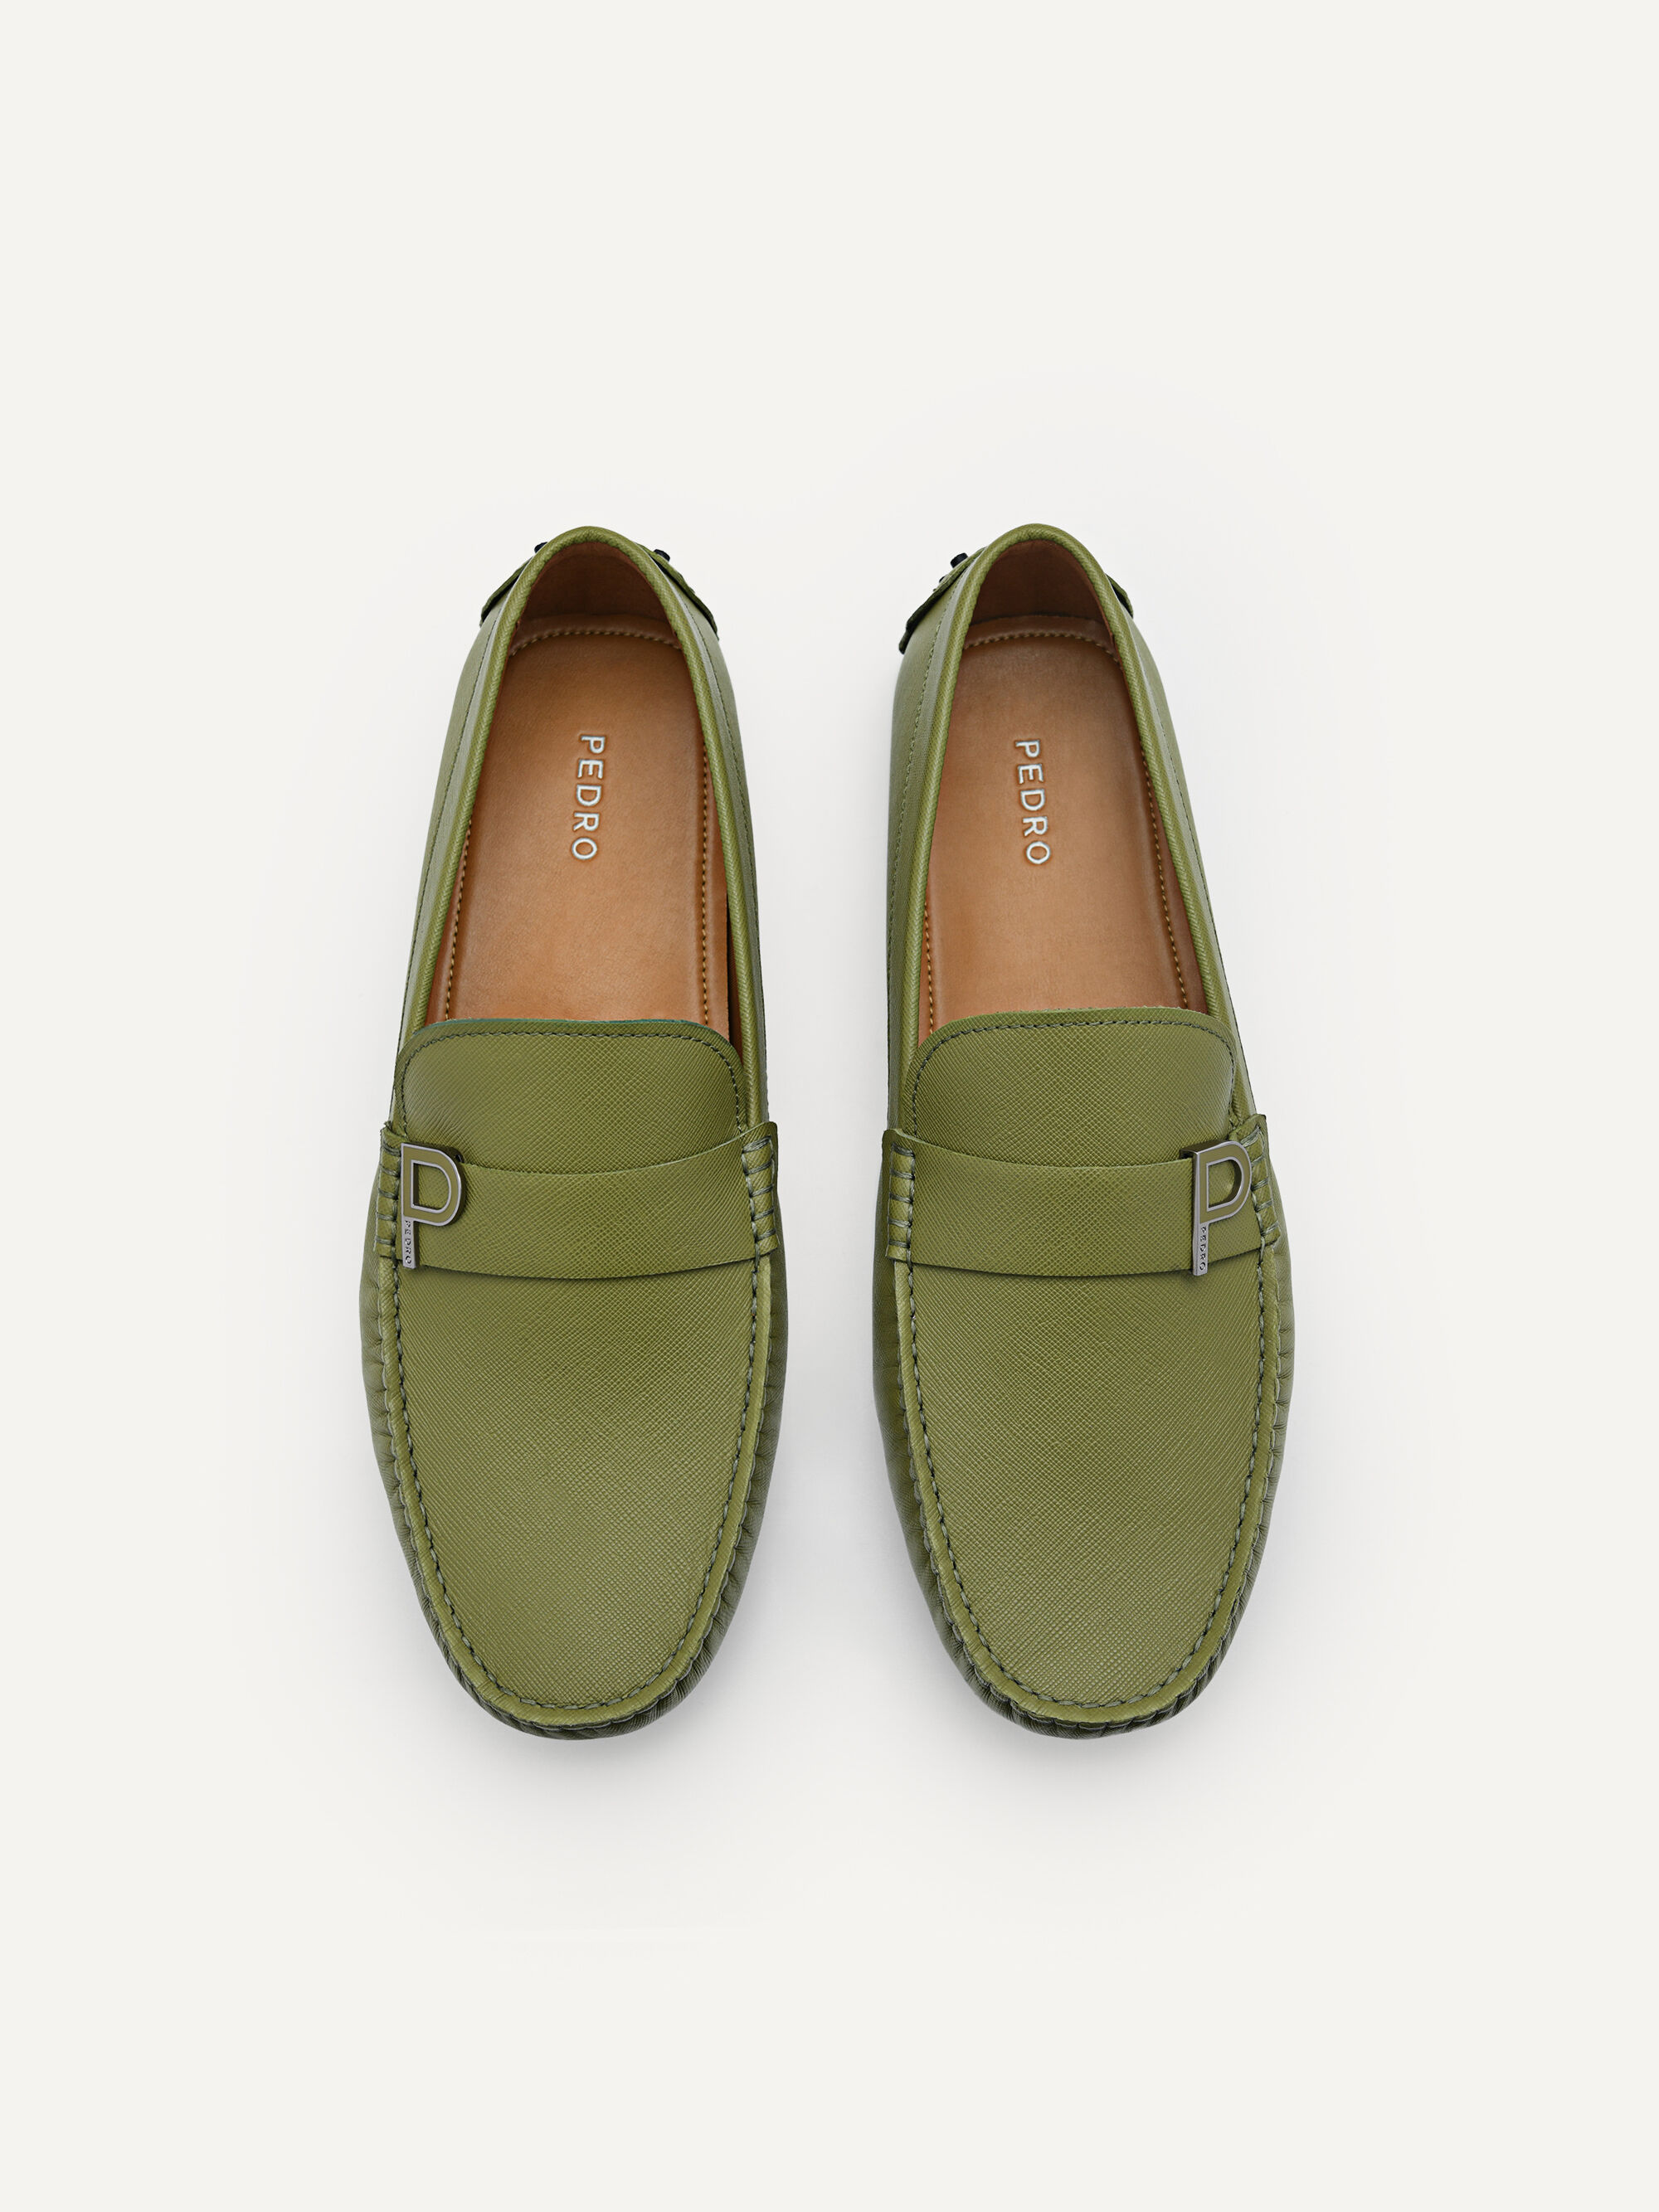 Leather Metal Bit Driving Shoes, Military Green